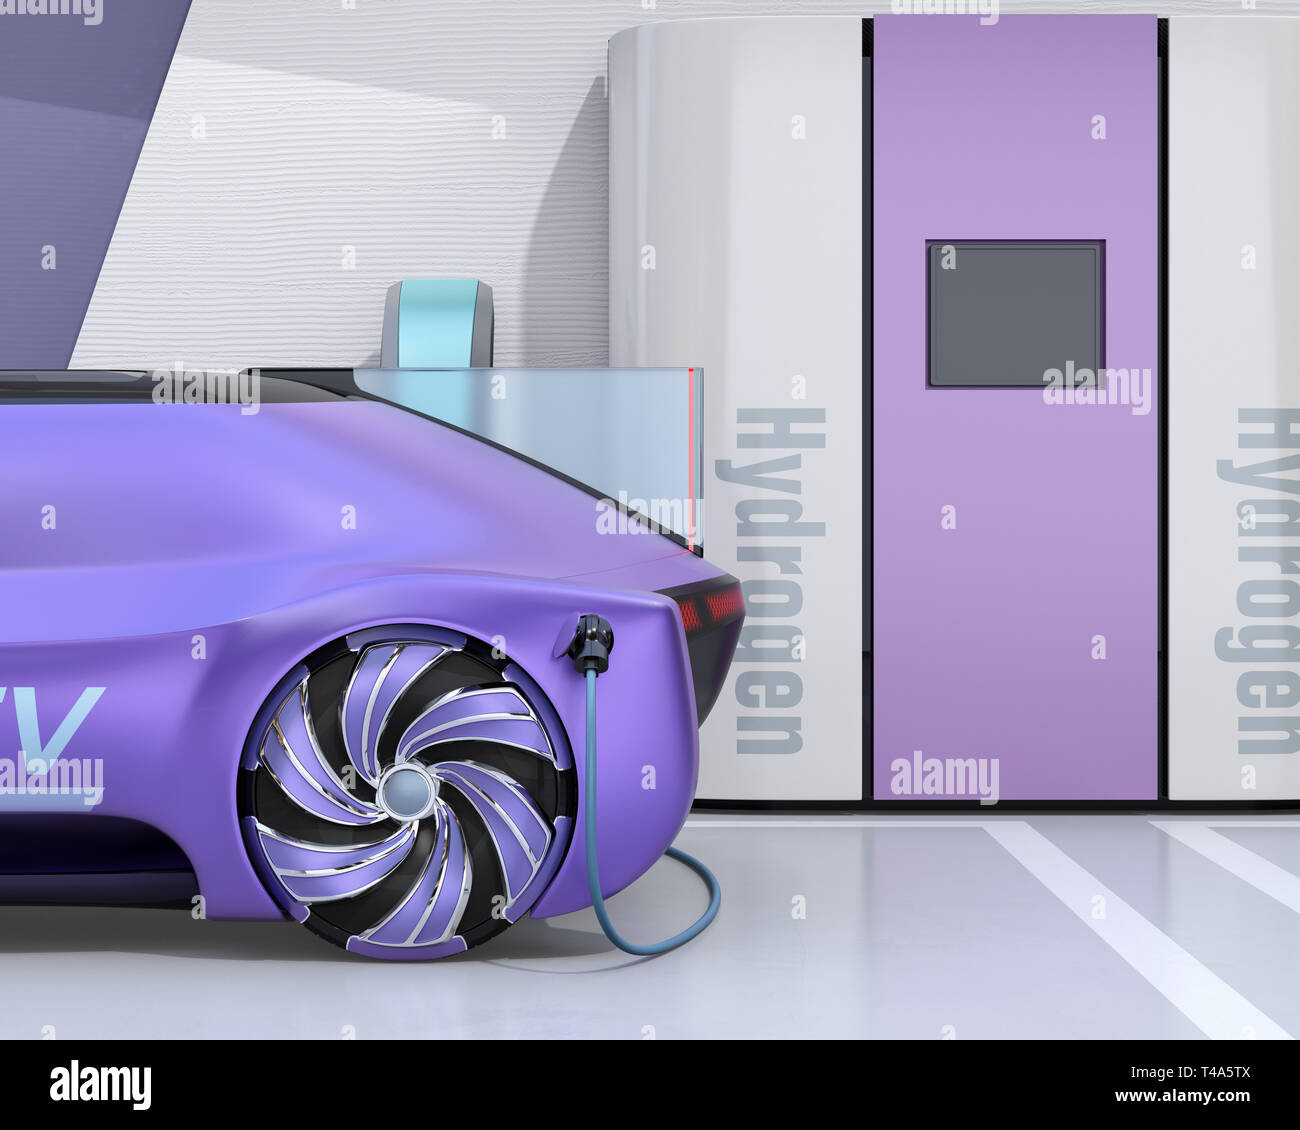 Close-up view of Fuel Cell powered autonomous car filling gas in Fuel Cell Hydrogen Station. 3D rendering image. Stock Photo